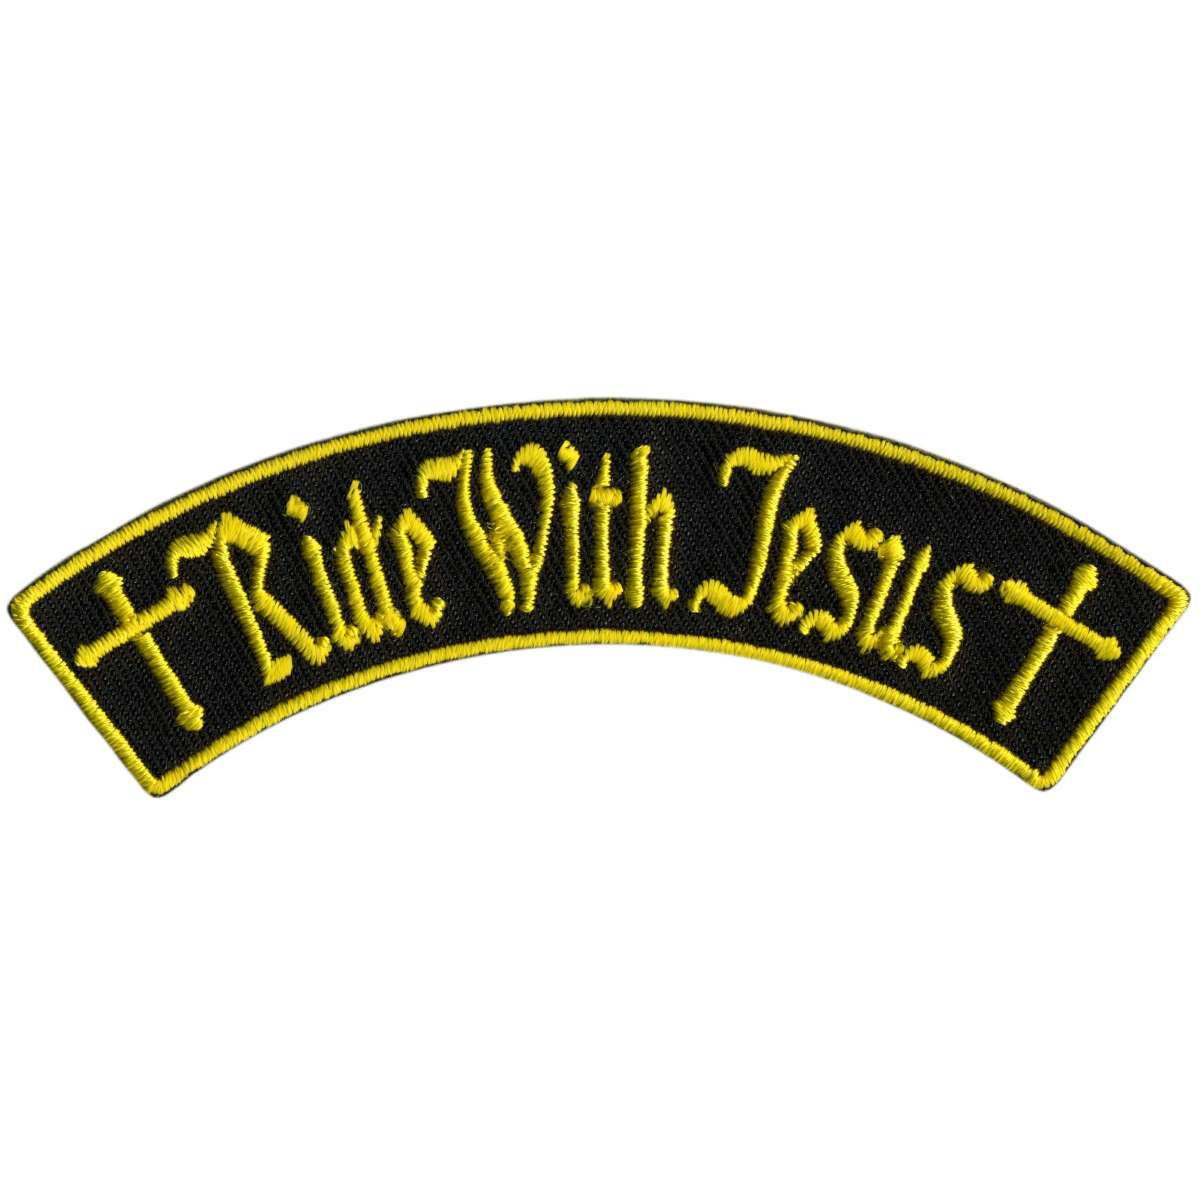 Hot Leathers Ride With Jesus 4"X 1" Top Rocker Patch PPM4206